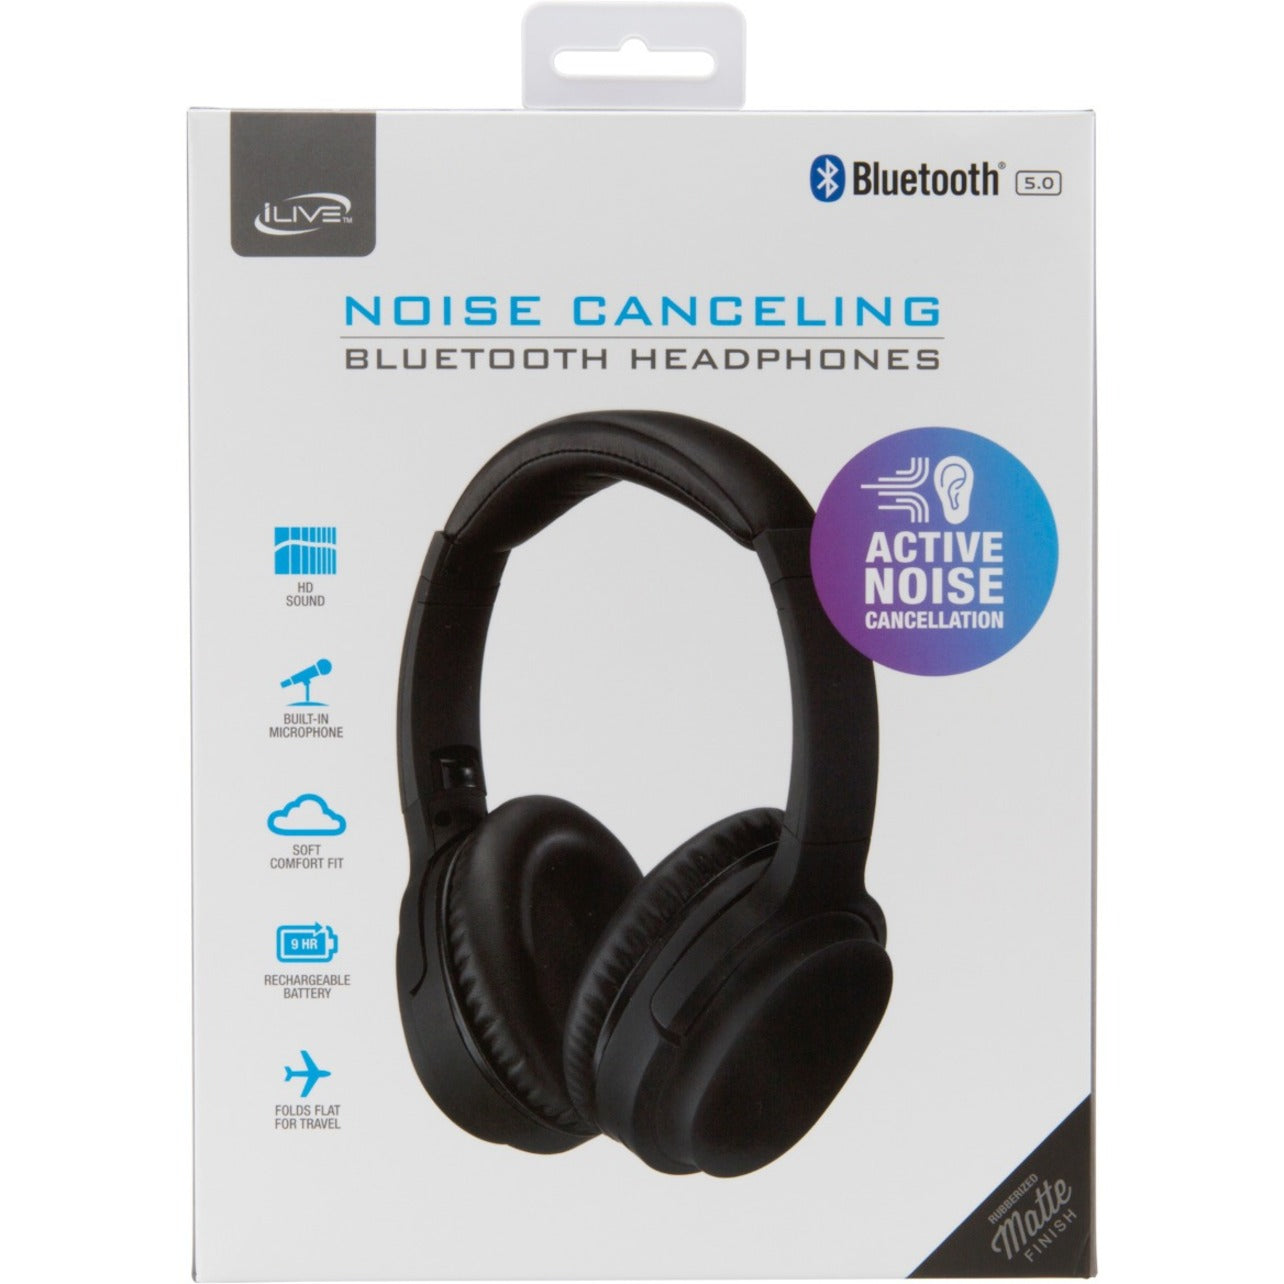 iLive IAHN40B Headset, Wireless Bluetooth On-ear Headset with Active Noise Canceling, Rechargeable Battery, and USB Charging